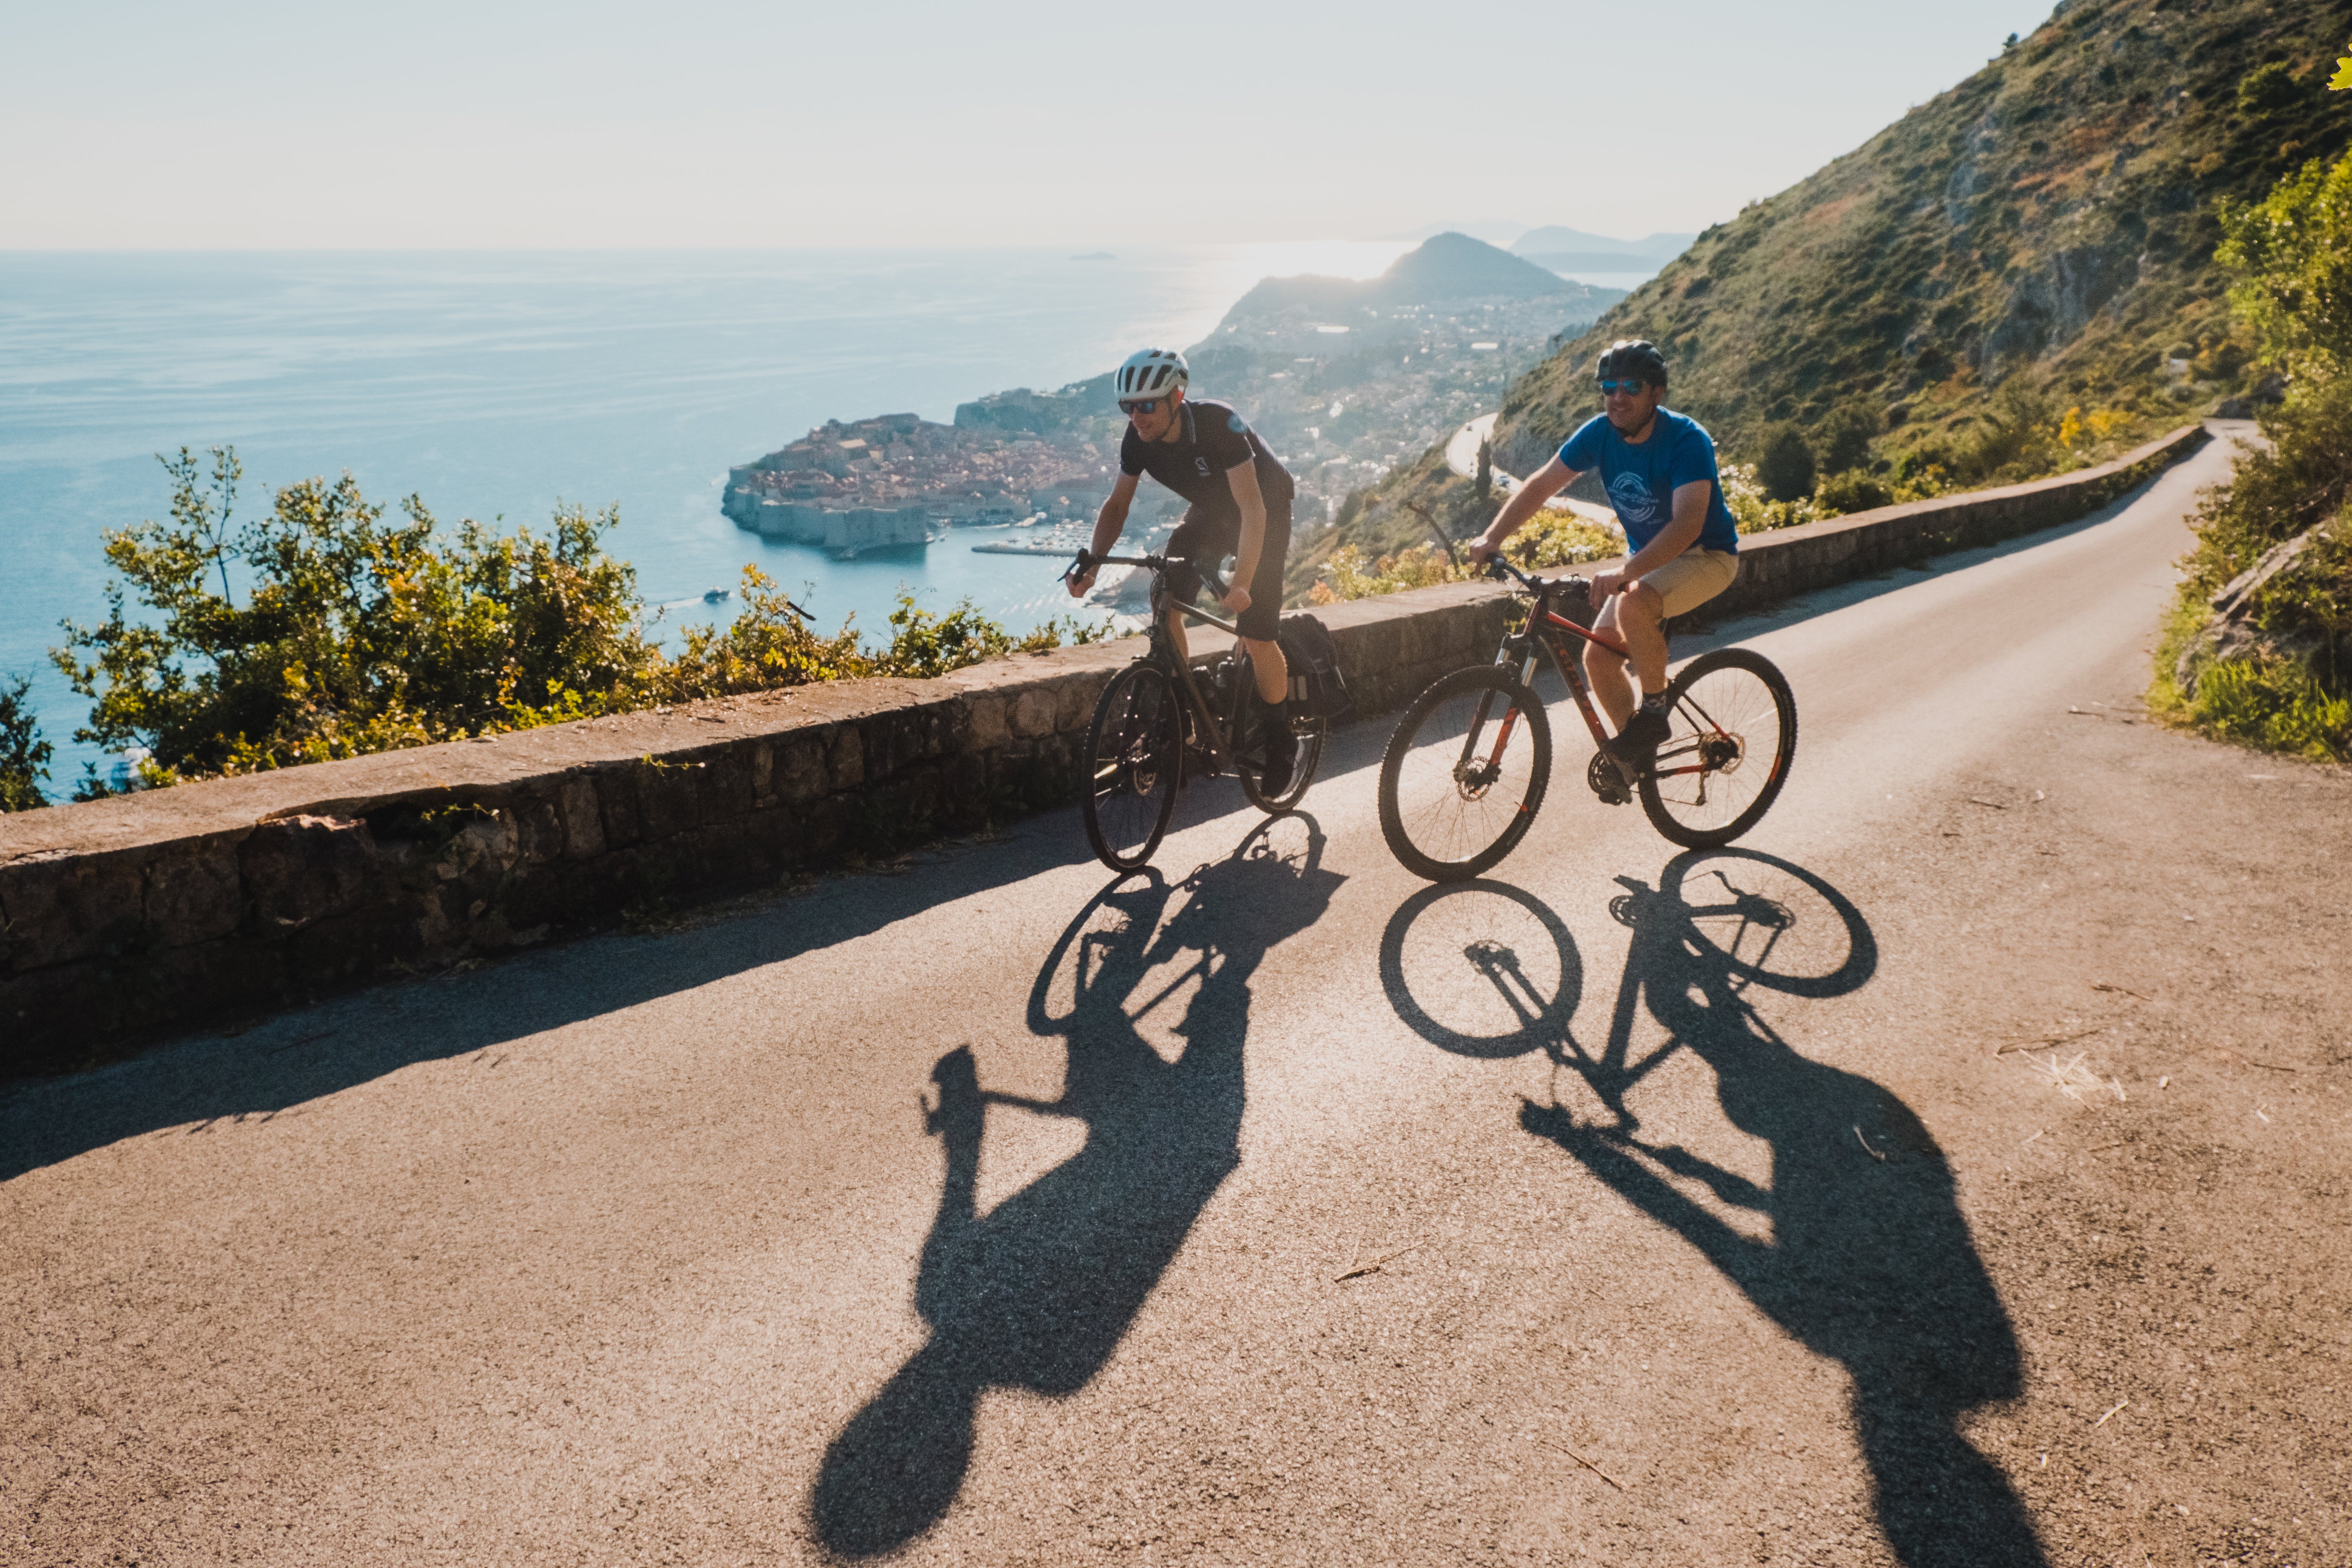 Cycle the 685-mile Via Adriatica that takes you from Pula all the way past Dubrovnik to the Montenegrin border